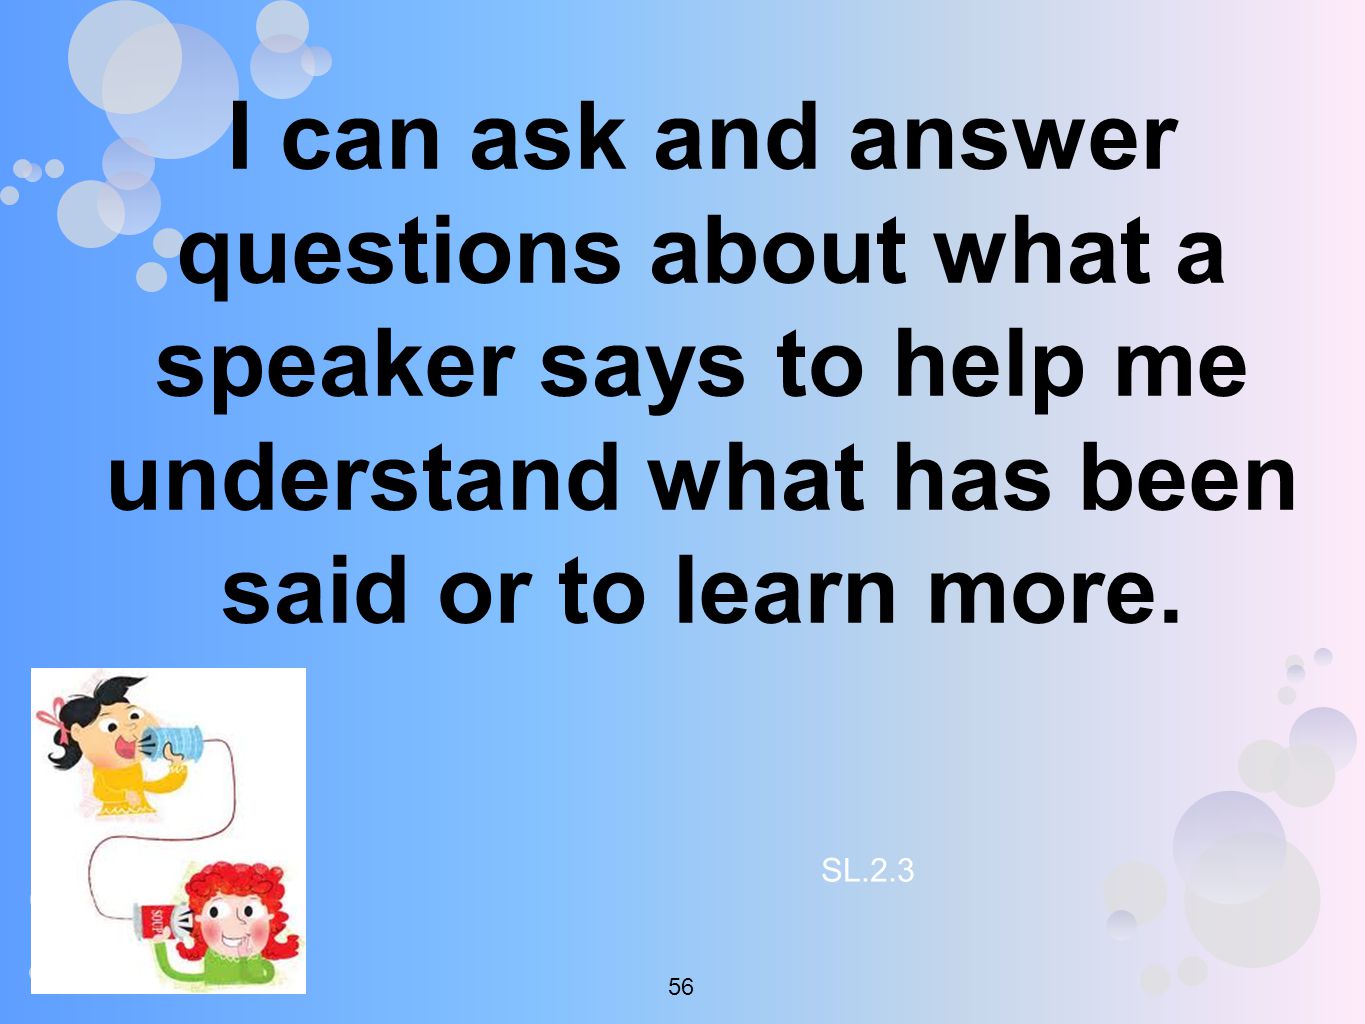 I can ask and answer questions about what a speaker says to help me understand what has been said or to learn more.